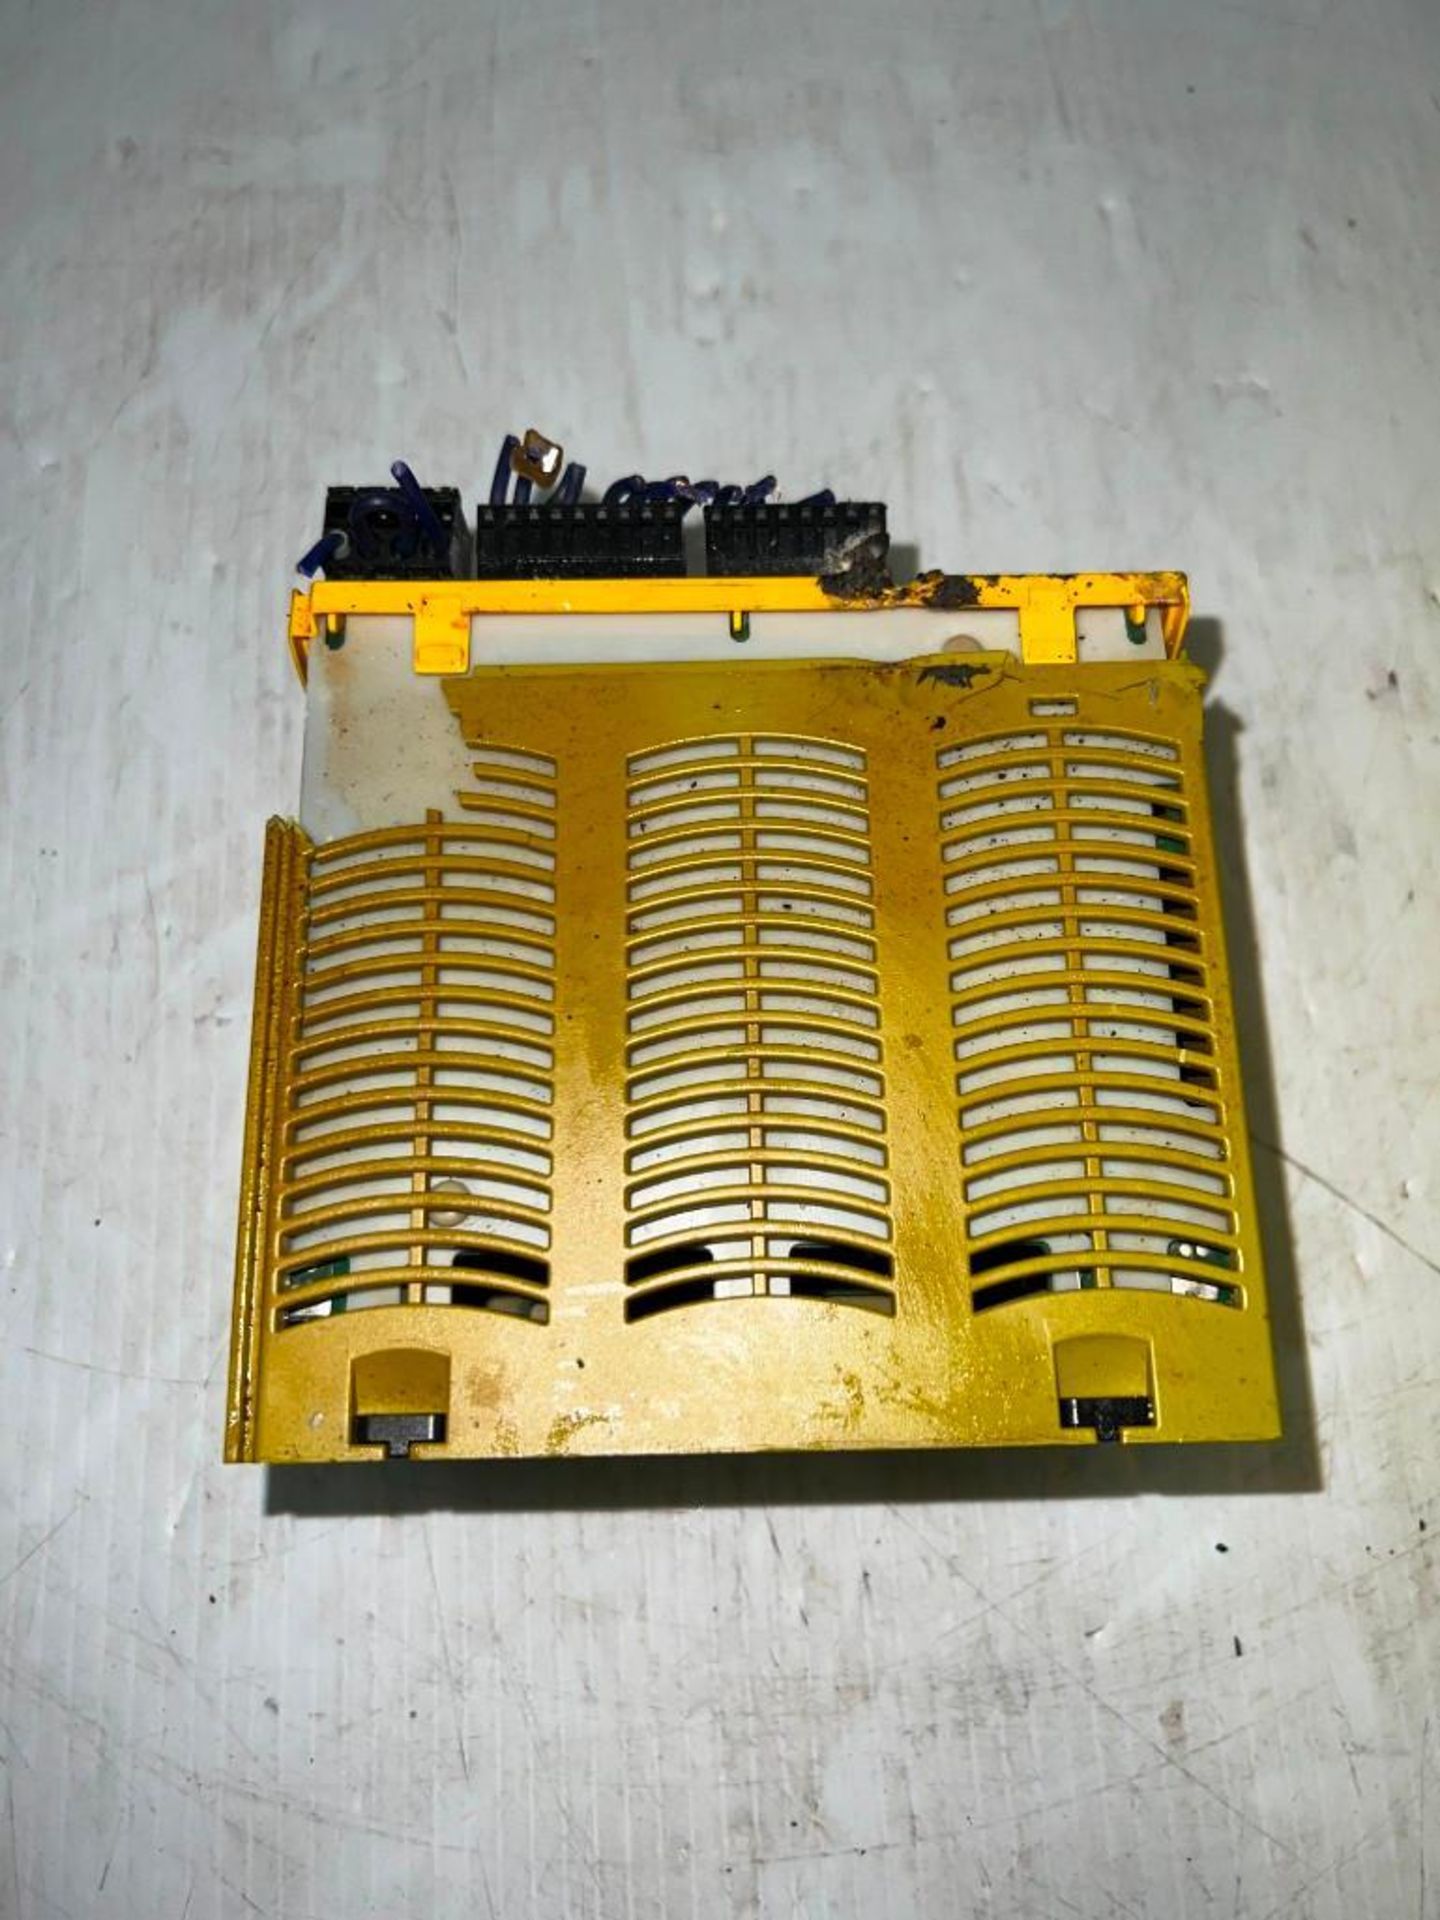 Lot of Pilz Modules (Some have a broken casing) - Image 8 of 9